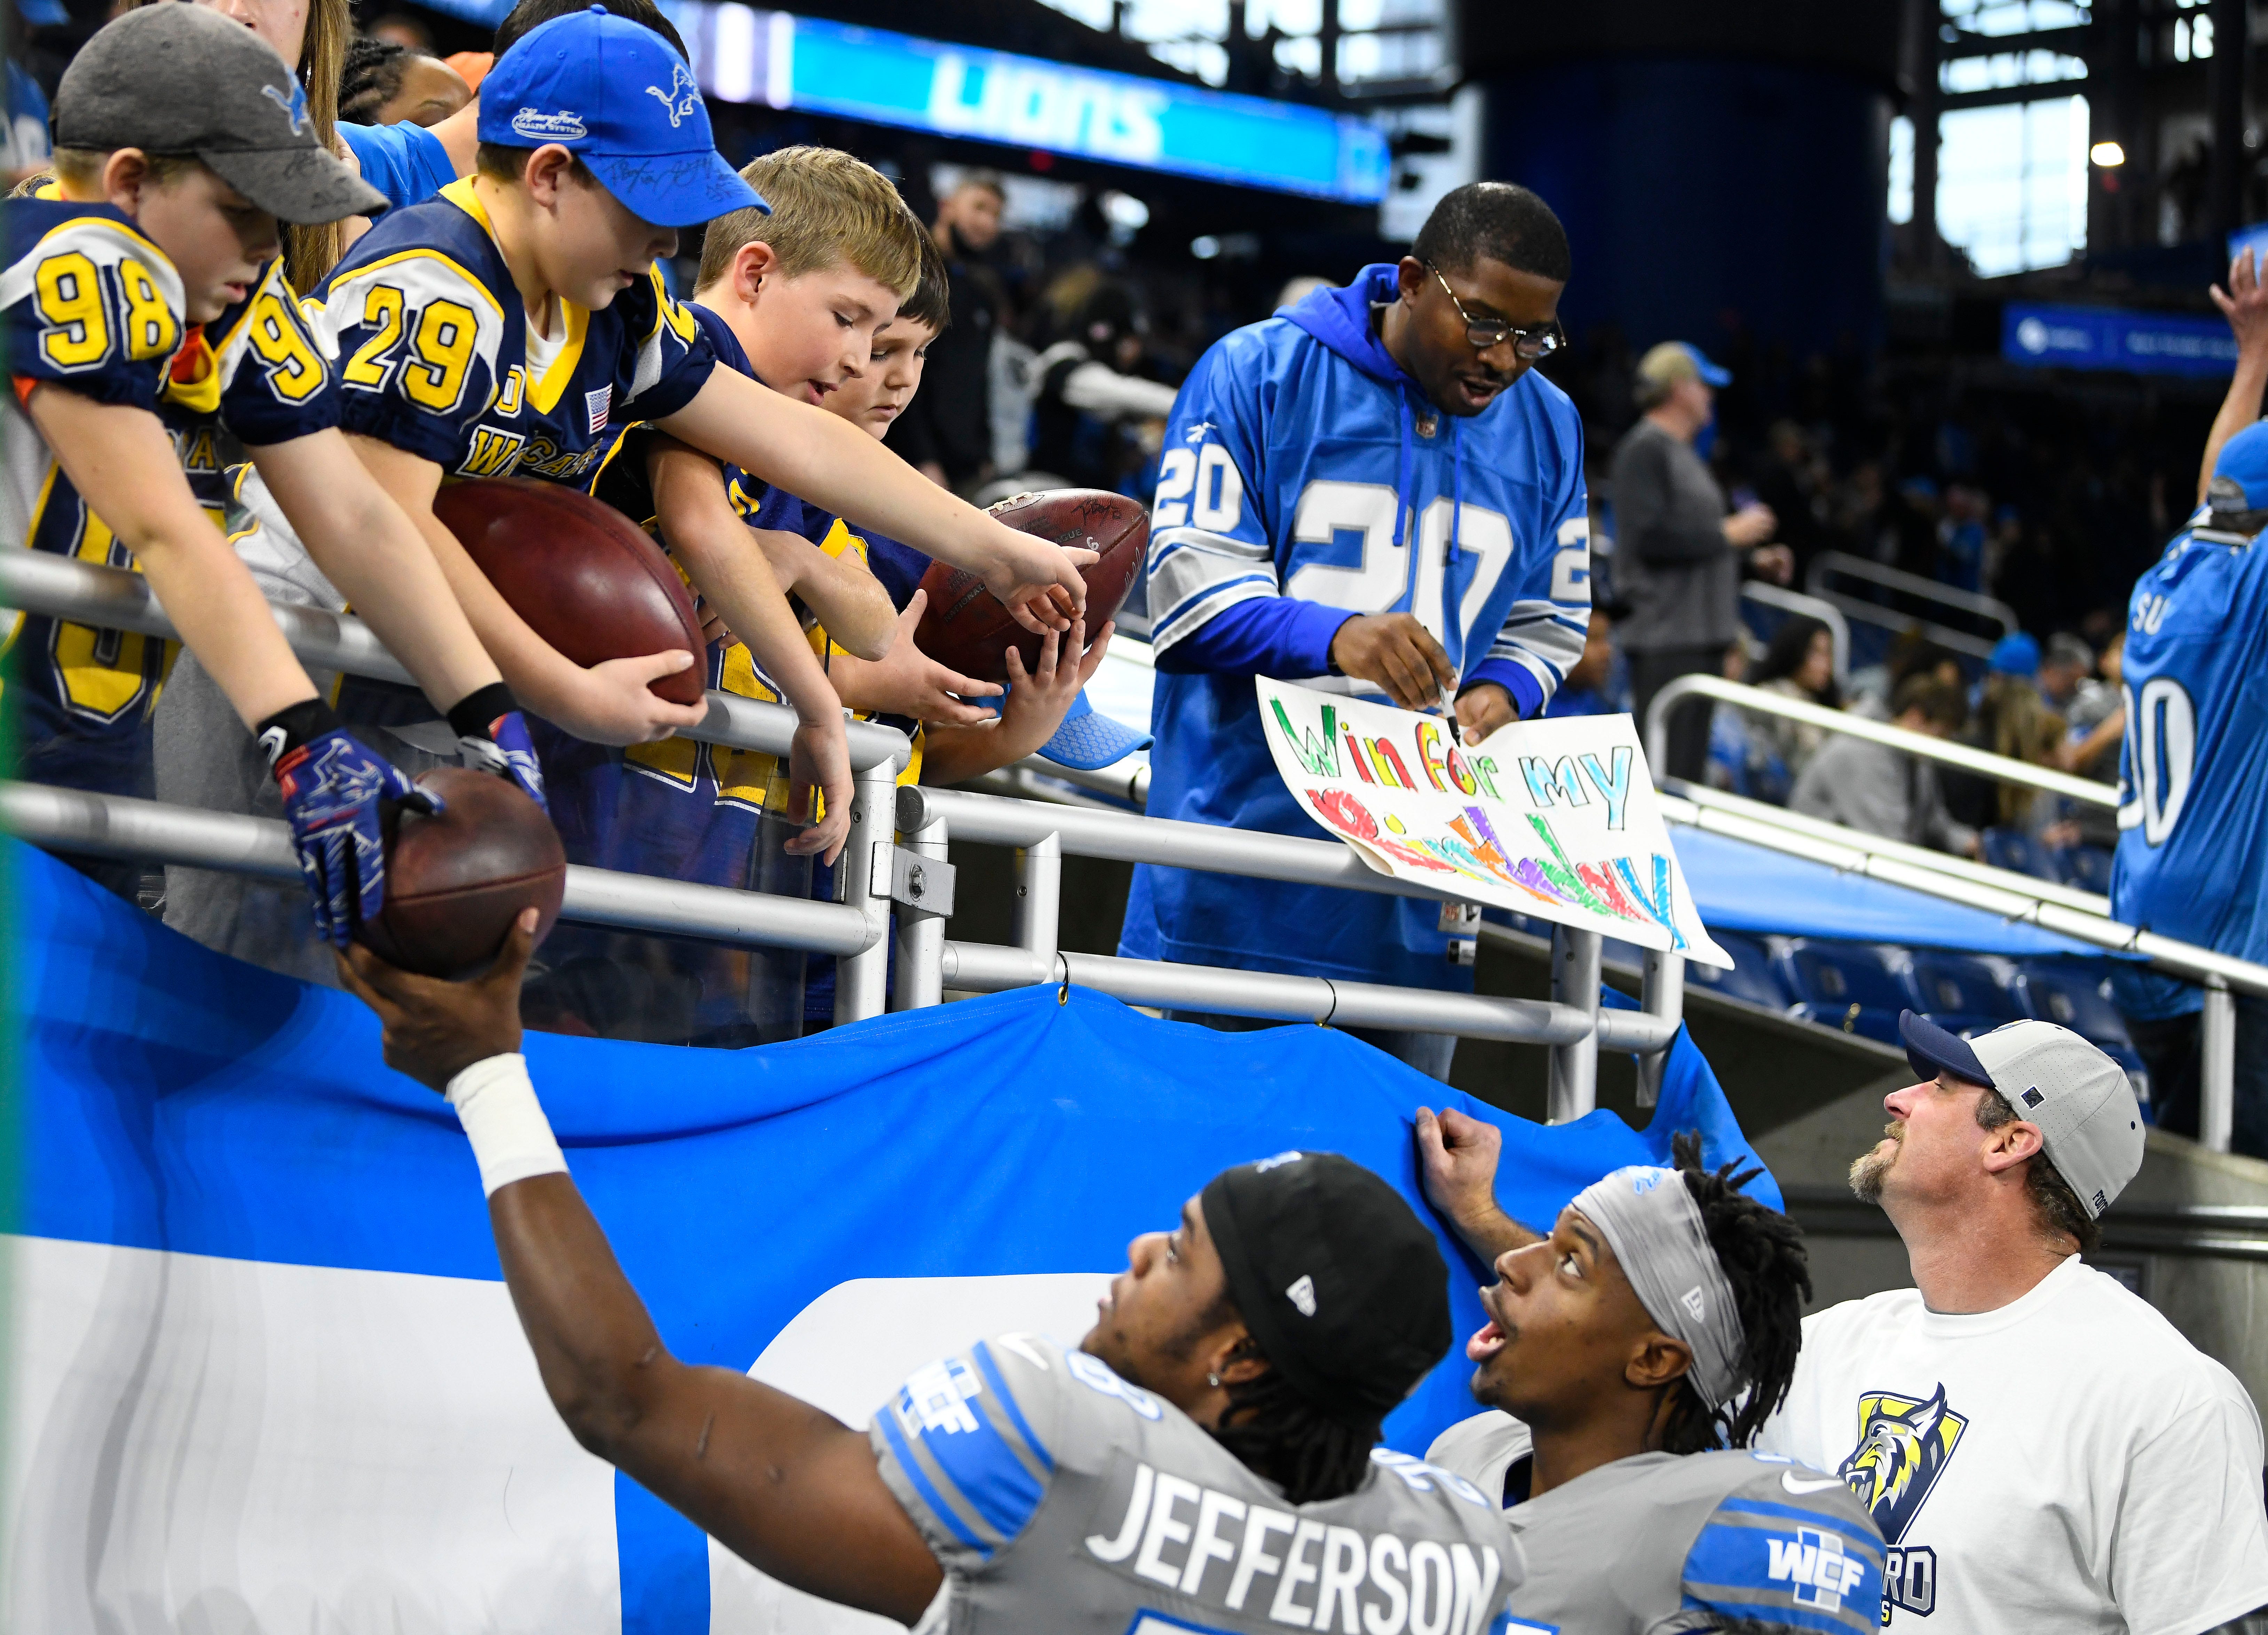 Detroit Lions players Jermar Jefferson, Jerry Jacobs and head coach Dan Campbell sign autographs for members of the Oxford Jr. Wildcats football team during warmups before the game against the  Minnesota Vikings at Ford Field in Detroit, Michigan on December 5, 2021.